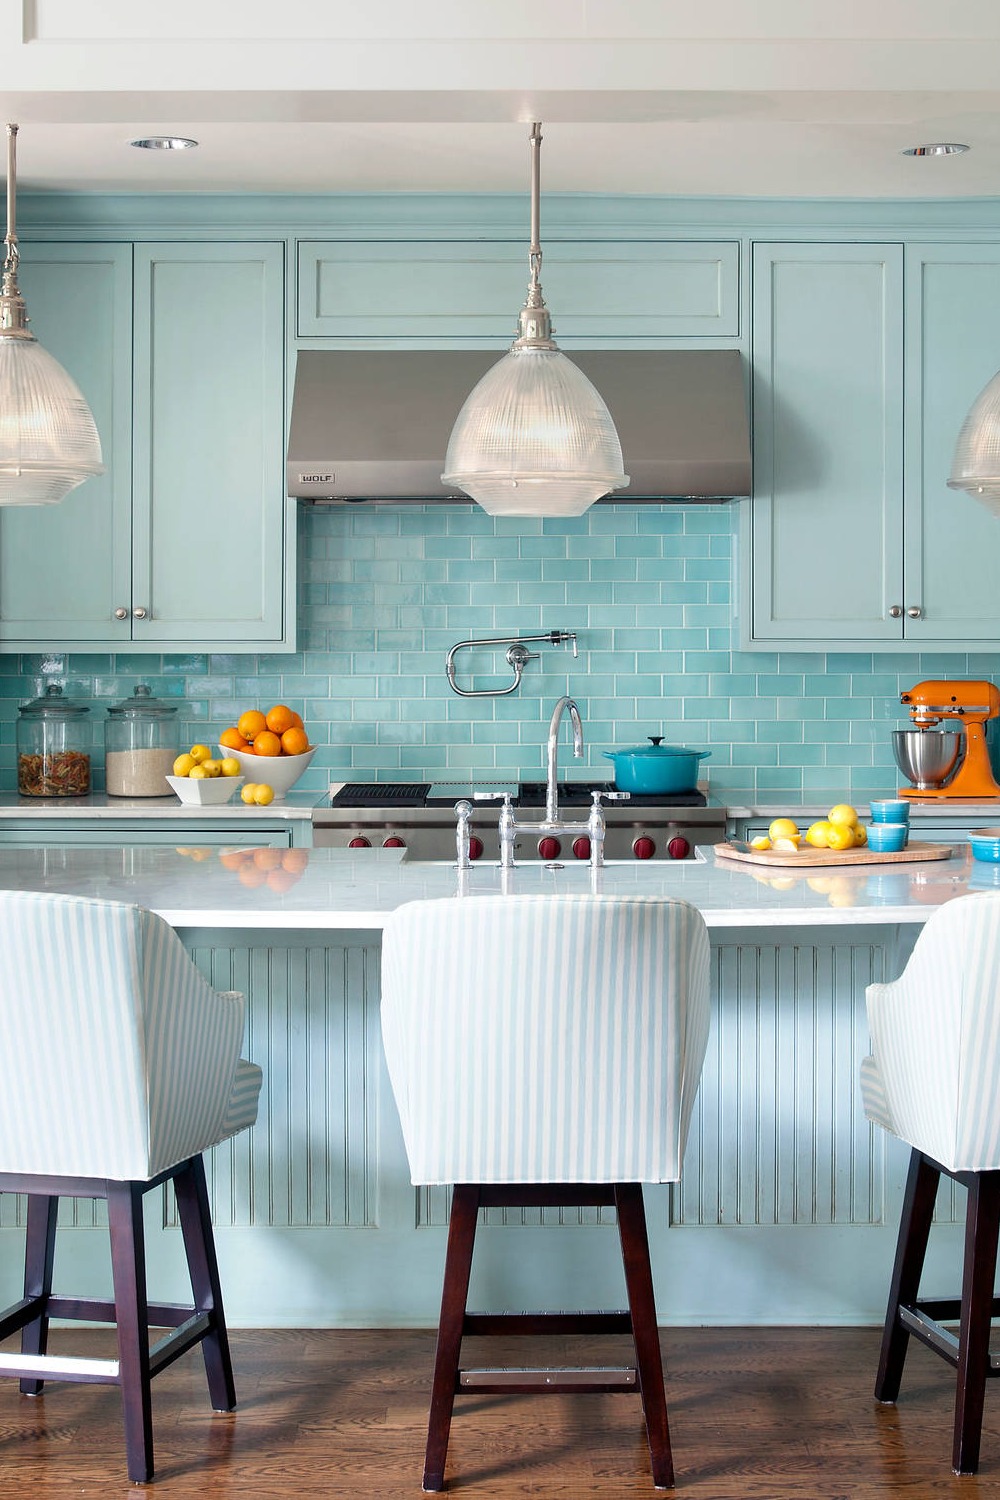 Light Blue Cabinets Gold Hardware White Marble Countertop Tile Backsplash Contemporary Kitchen Timeless Appeal Color Pairing Elegant Feel Kitchen Space